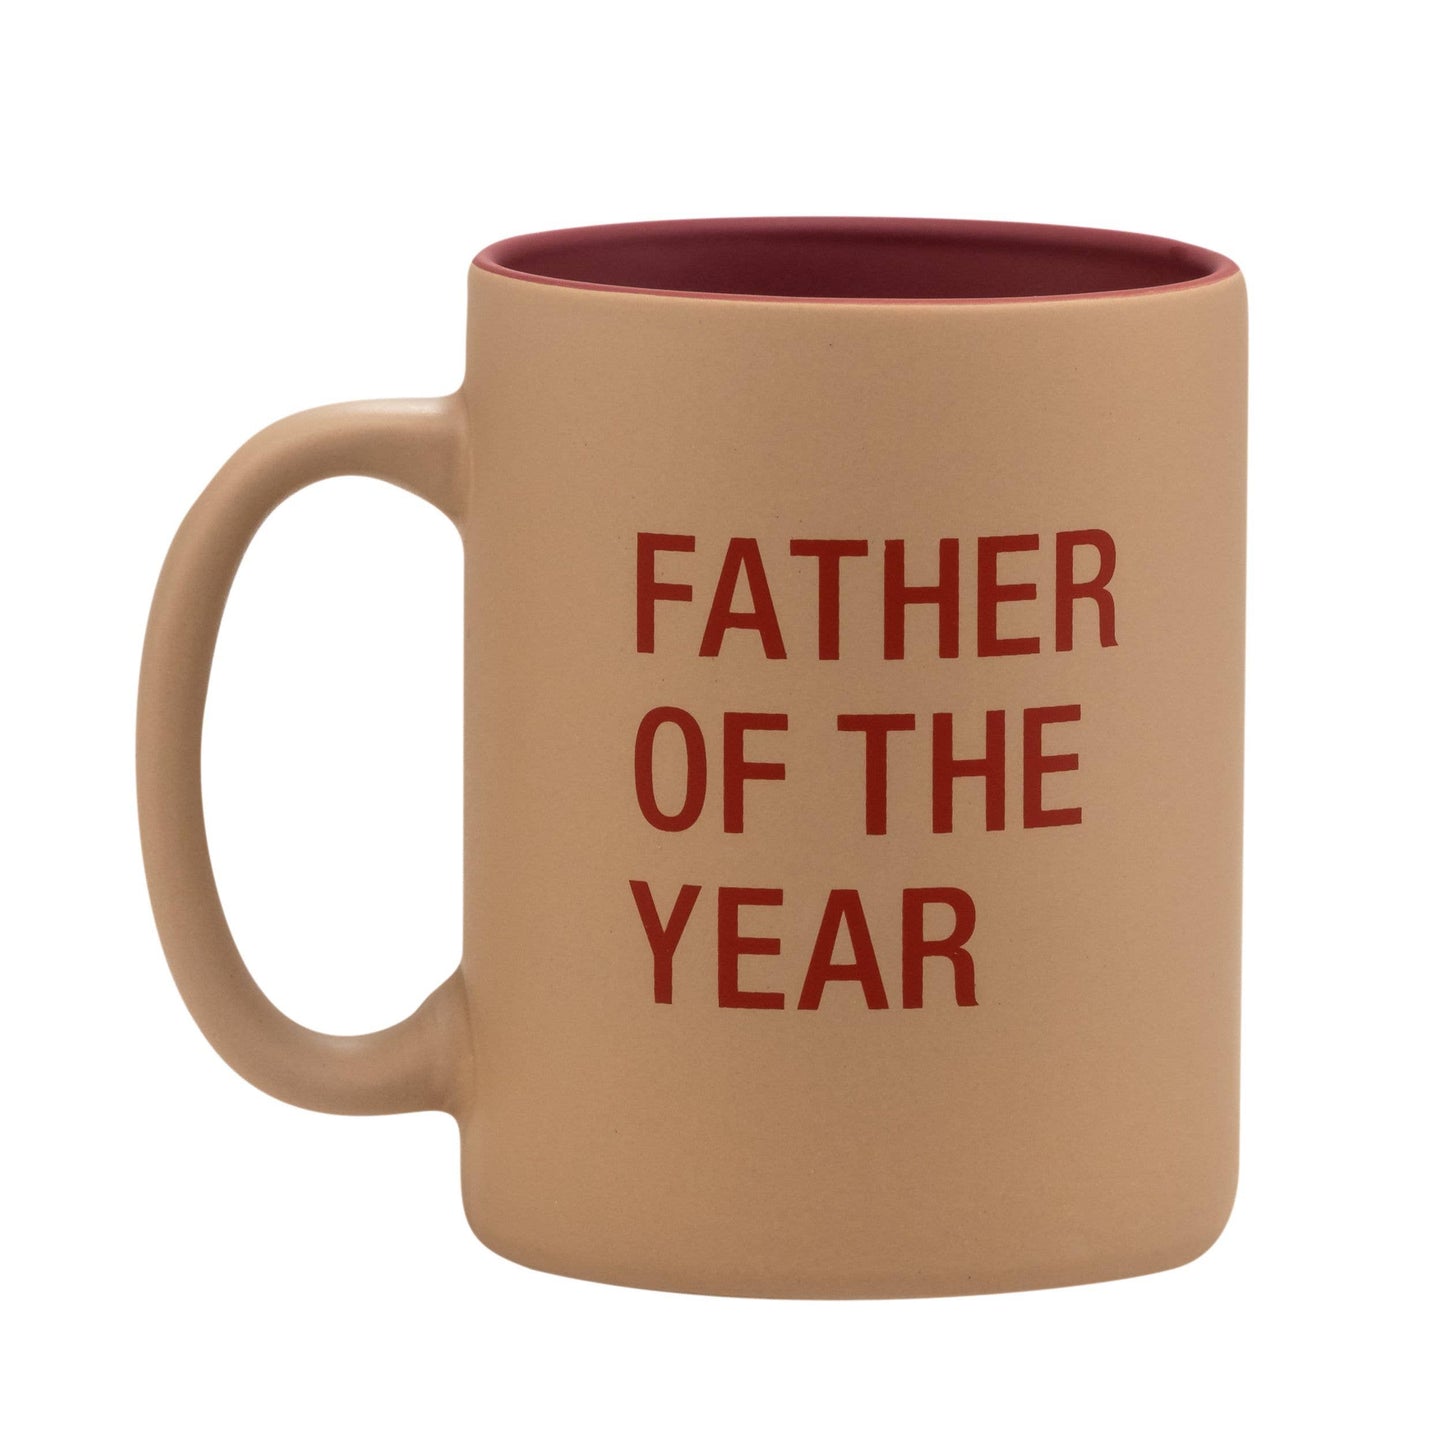 About Face Designs, Inc. - Father of the Year Mug